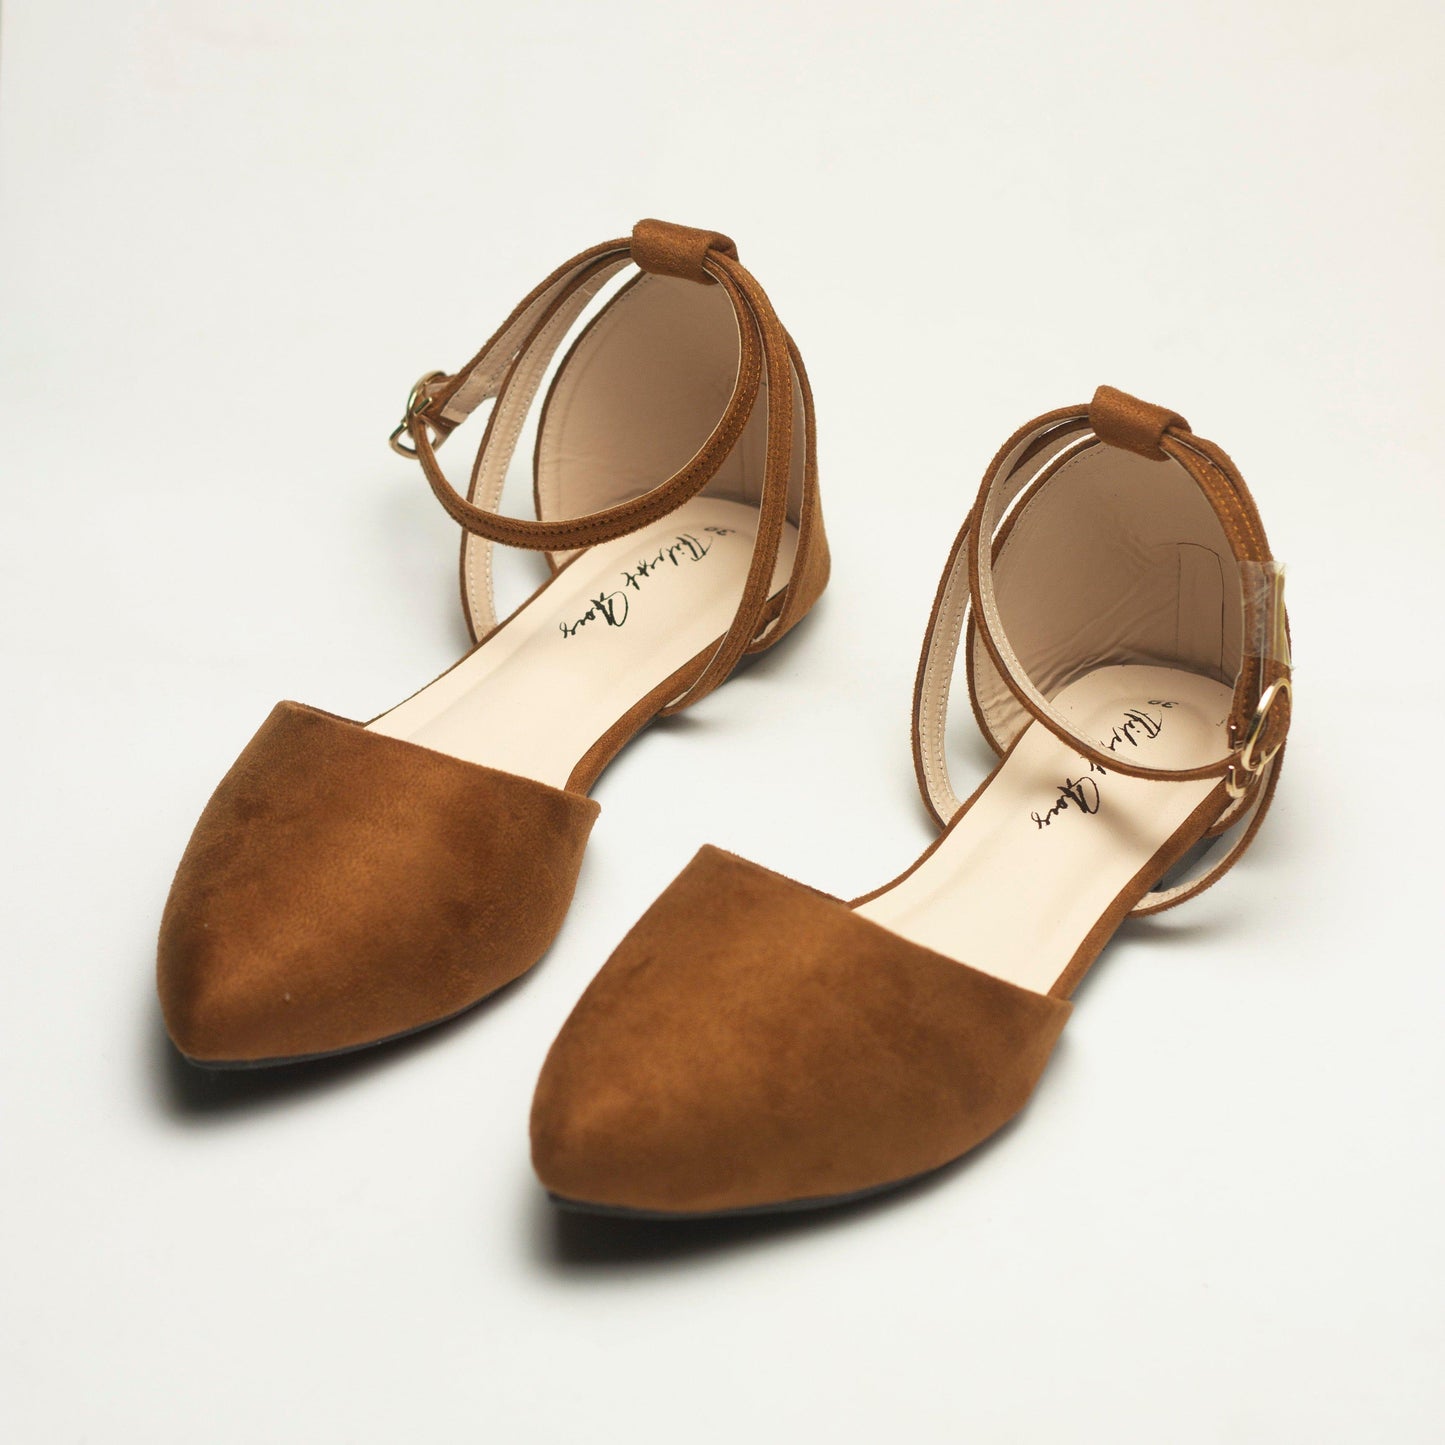 Nawabi Shoes BD Shoes 35 / chocolate Flat Sandals for Women: The Must-Have for Your Summer Wardrobe